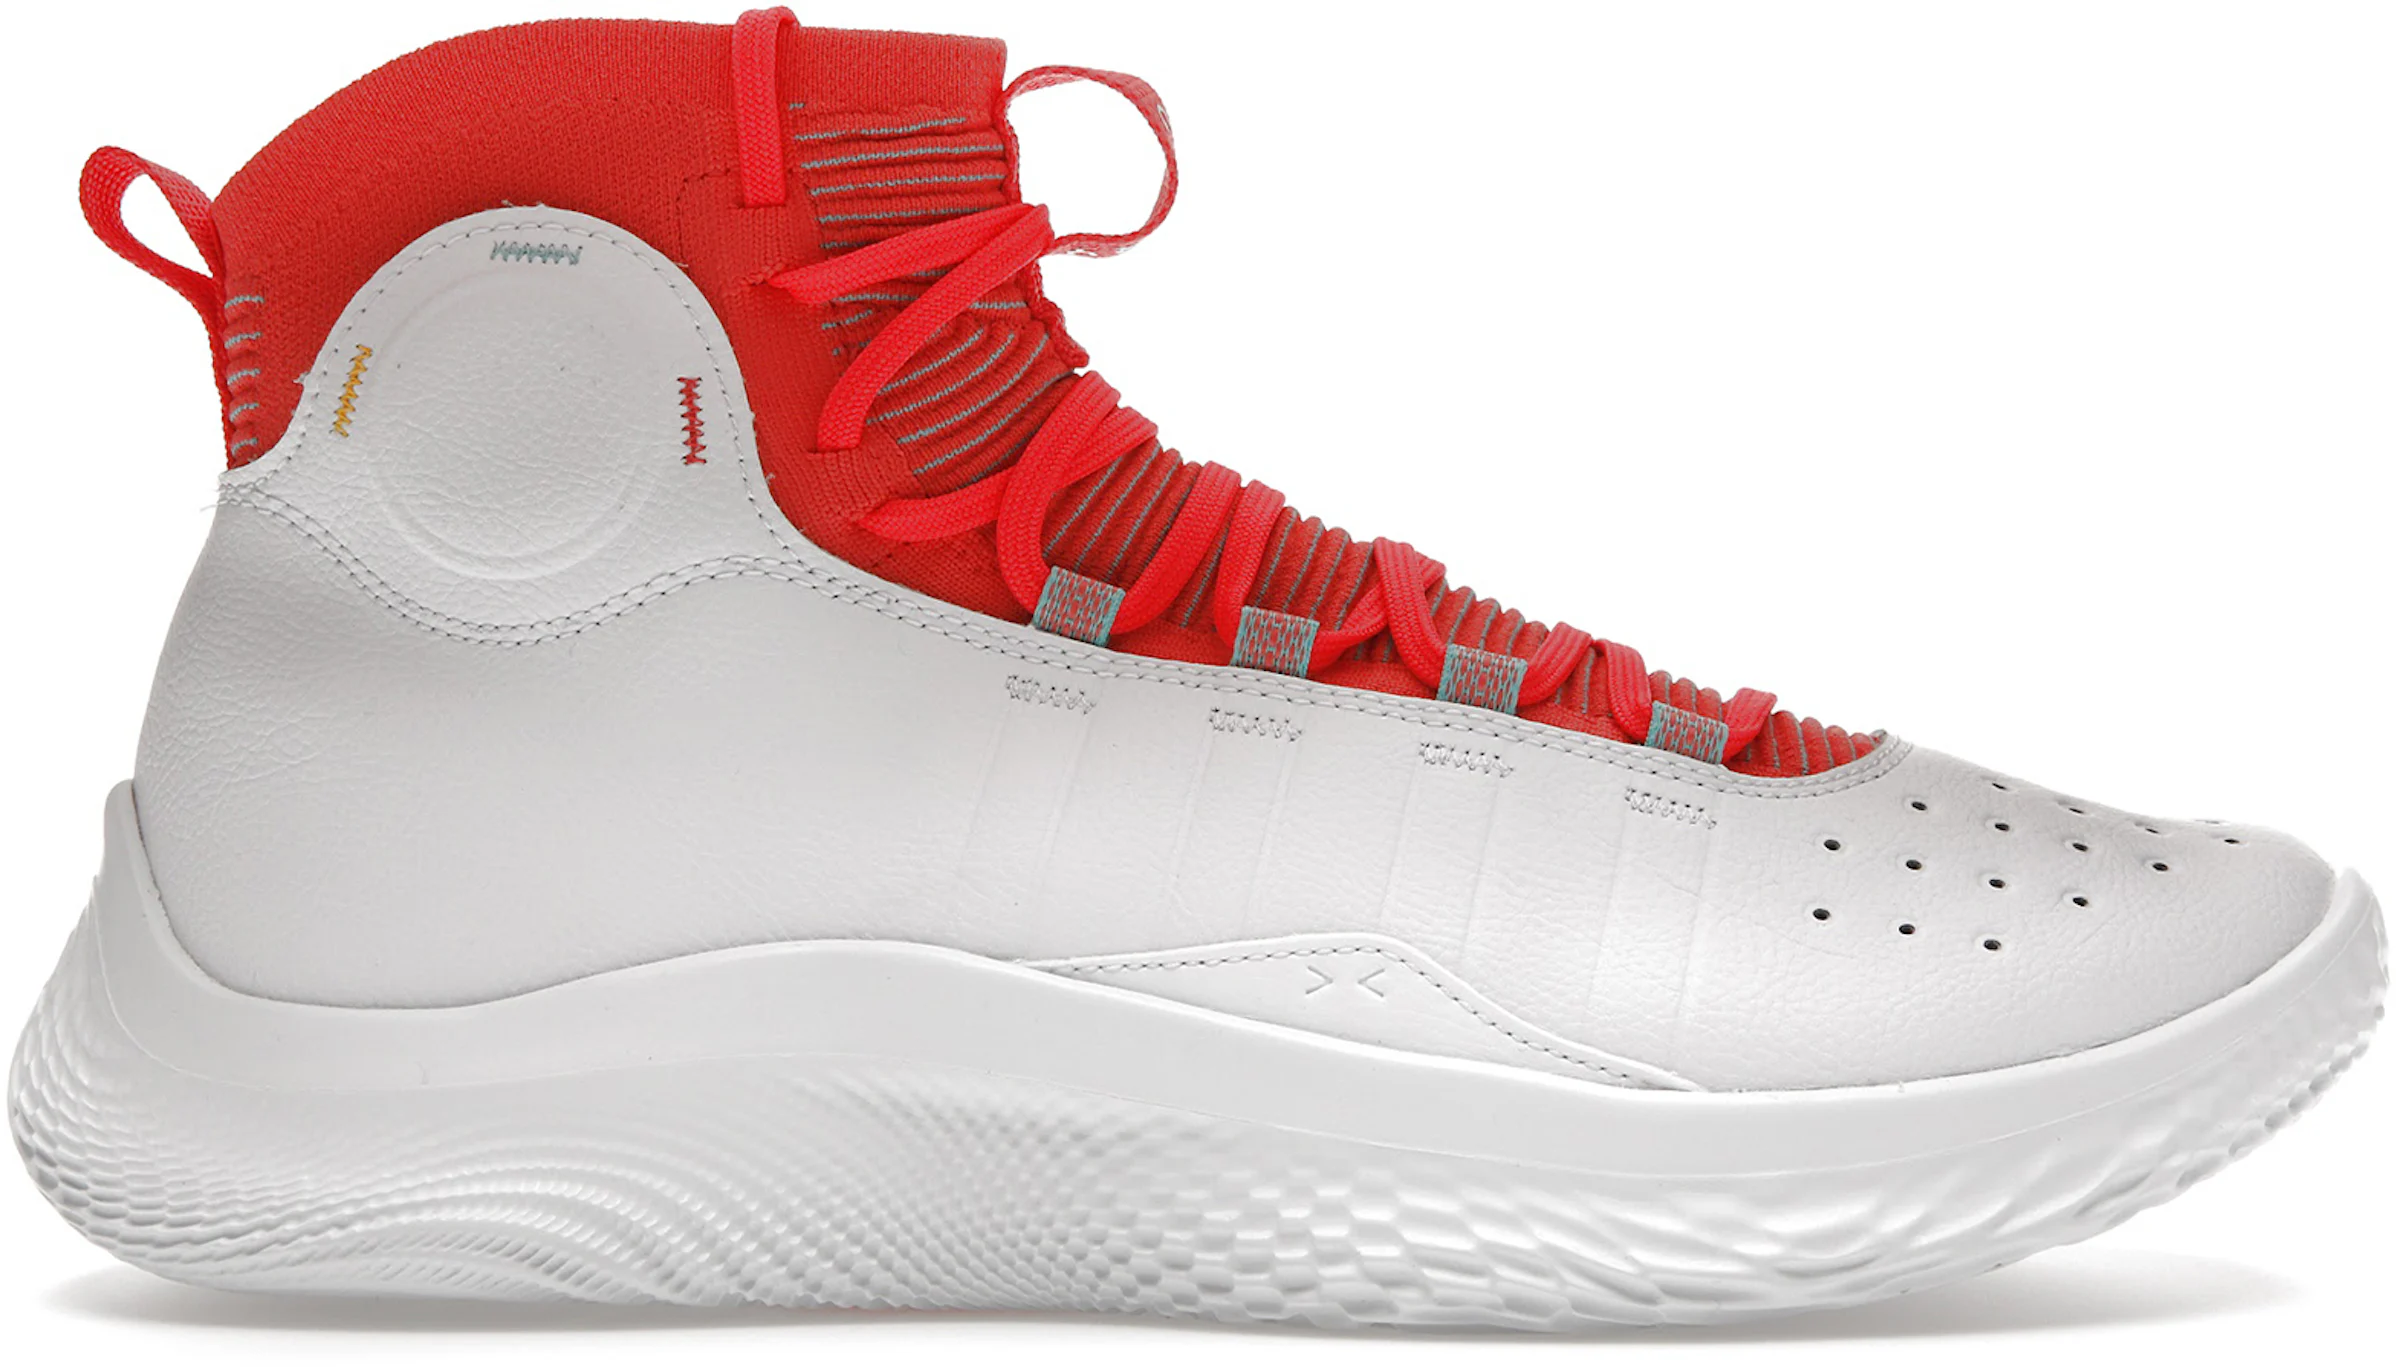 https://images.stockx.com/images/Under-Armour-Curry-4-Flotro-White-Red-Product.jpg?fit=fill&bg=FFFFFF&w=1200&h=857&fm=webp&auto=compress&dpr=2&trim=color&updated_at=1665080887&q=60